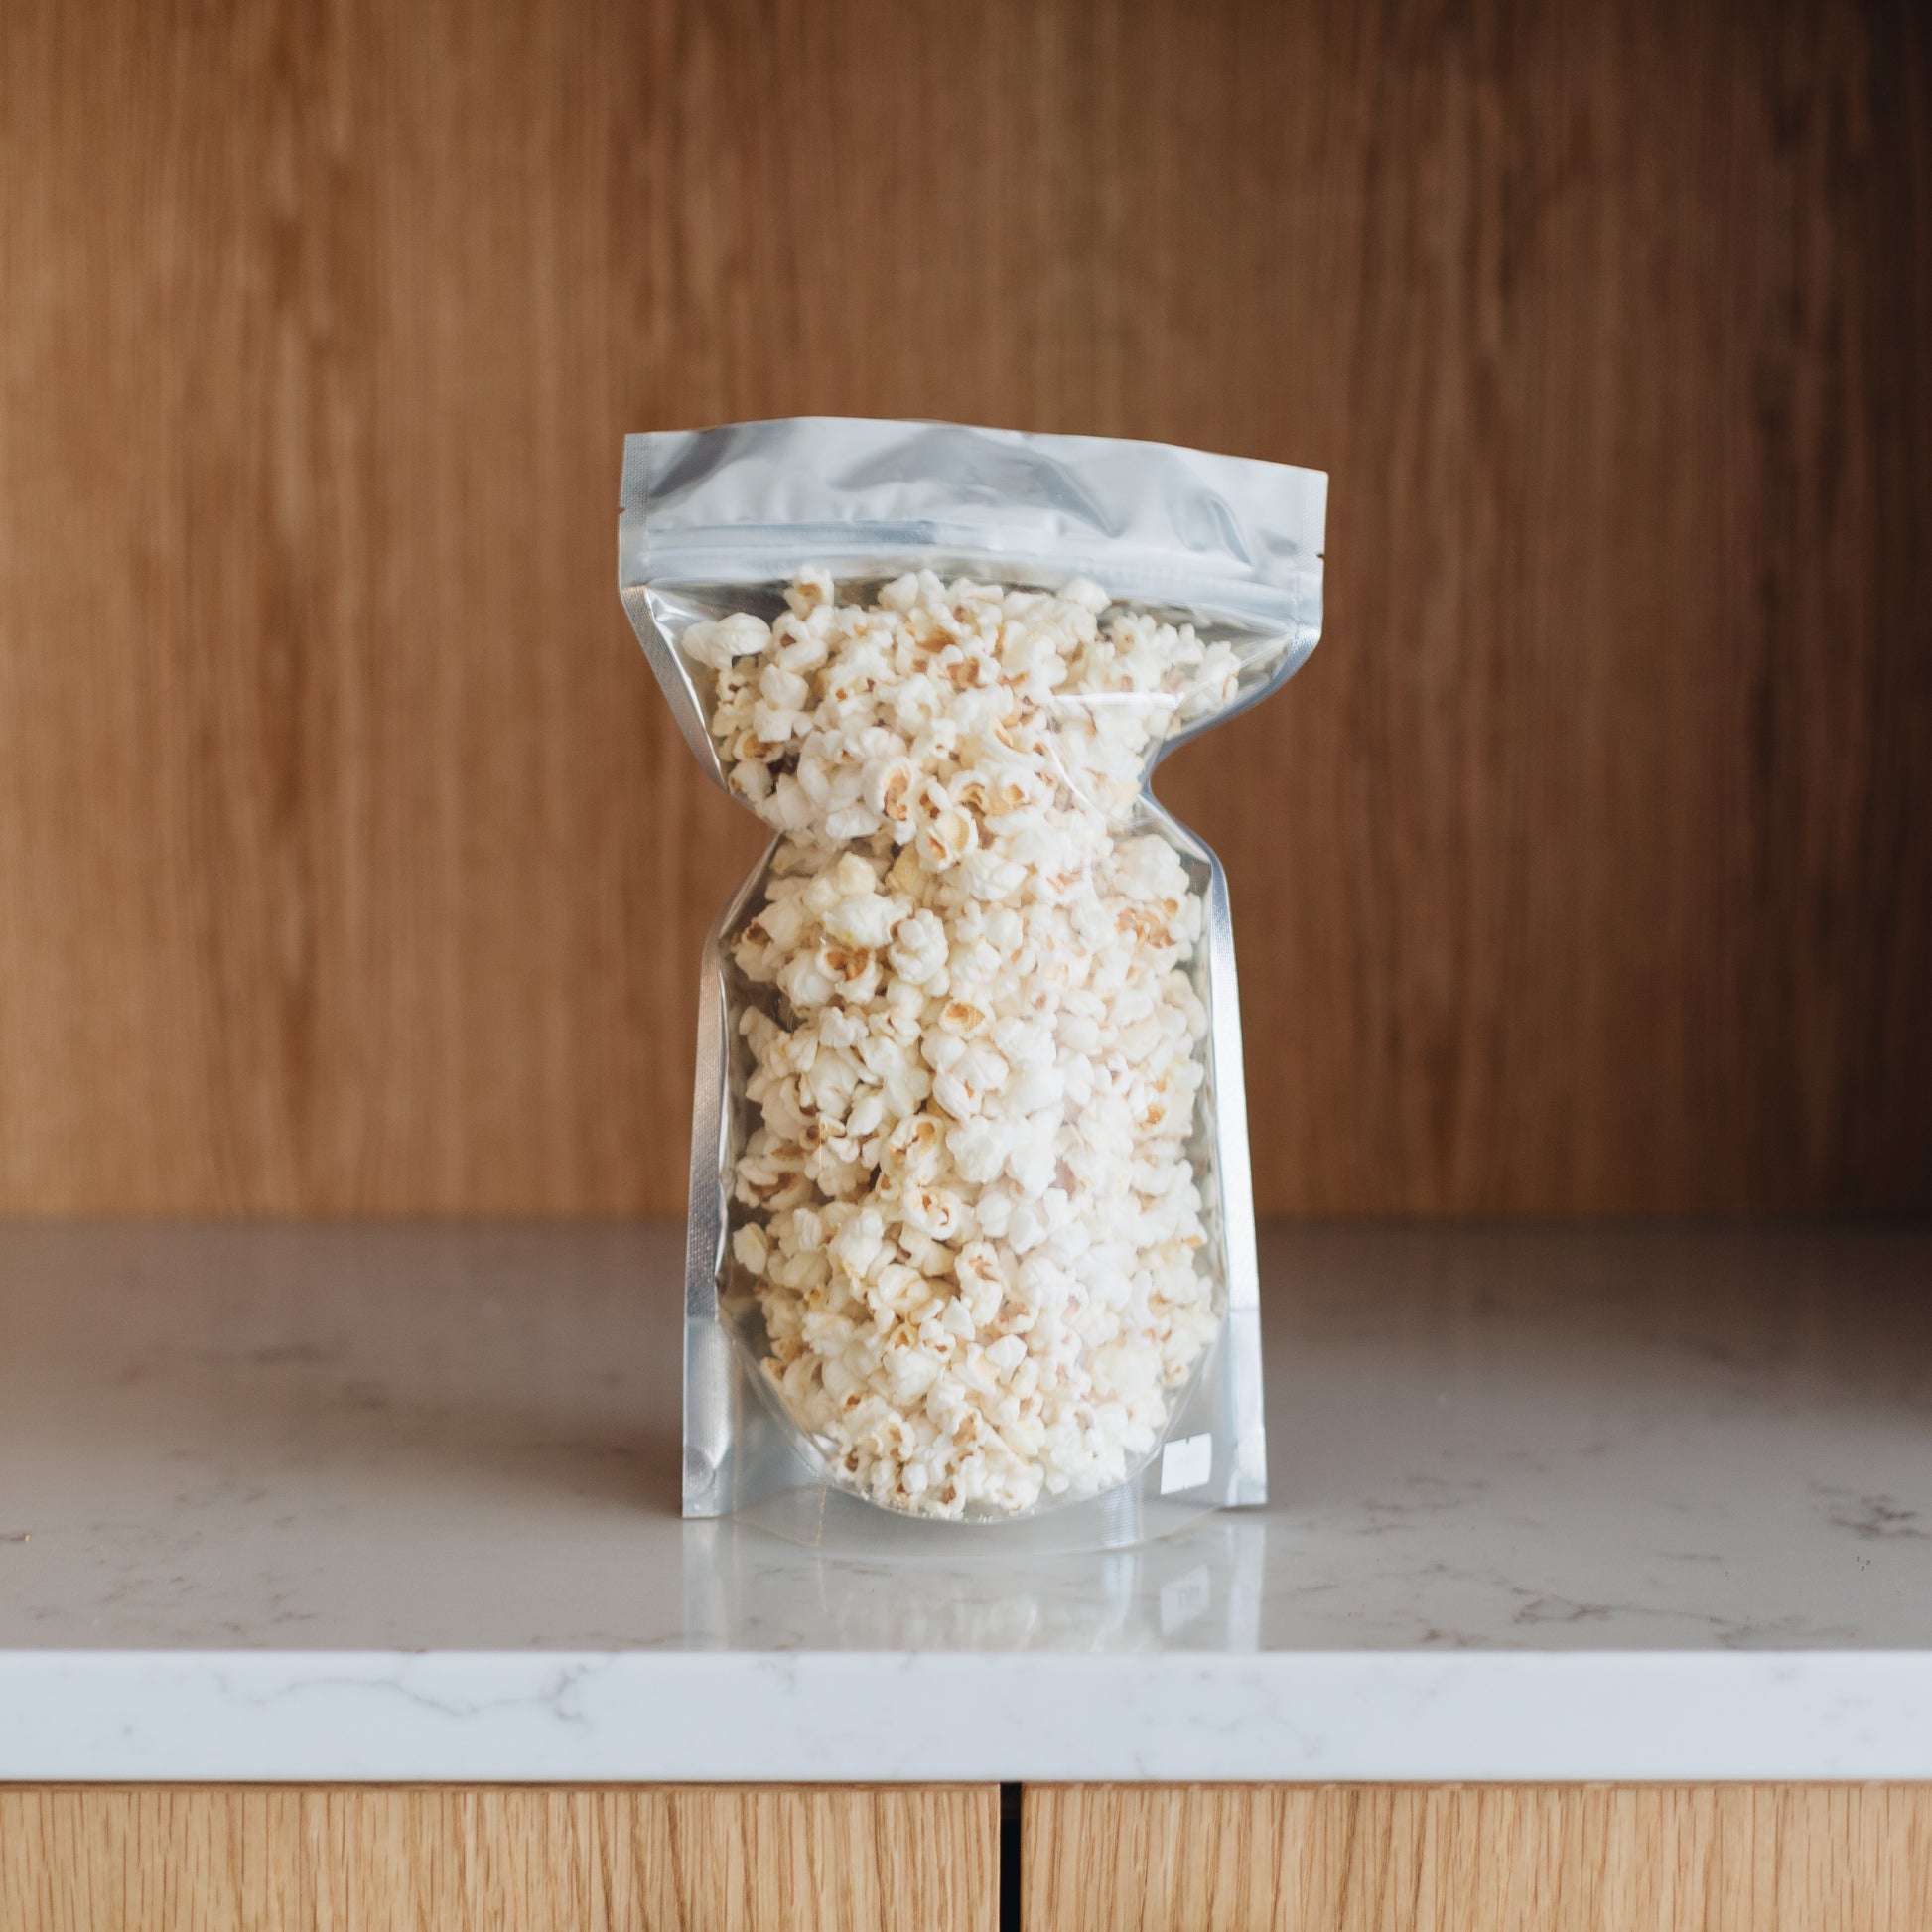 Salty, sweet, and the perfect crunch. Popnotch Goods Kettle Corn is an instant classic. Try this simple yet delicious treat. Order now online or stop in Popnotch Goods to get yourself a bag! Featured is our Large Bag (3.5oz).